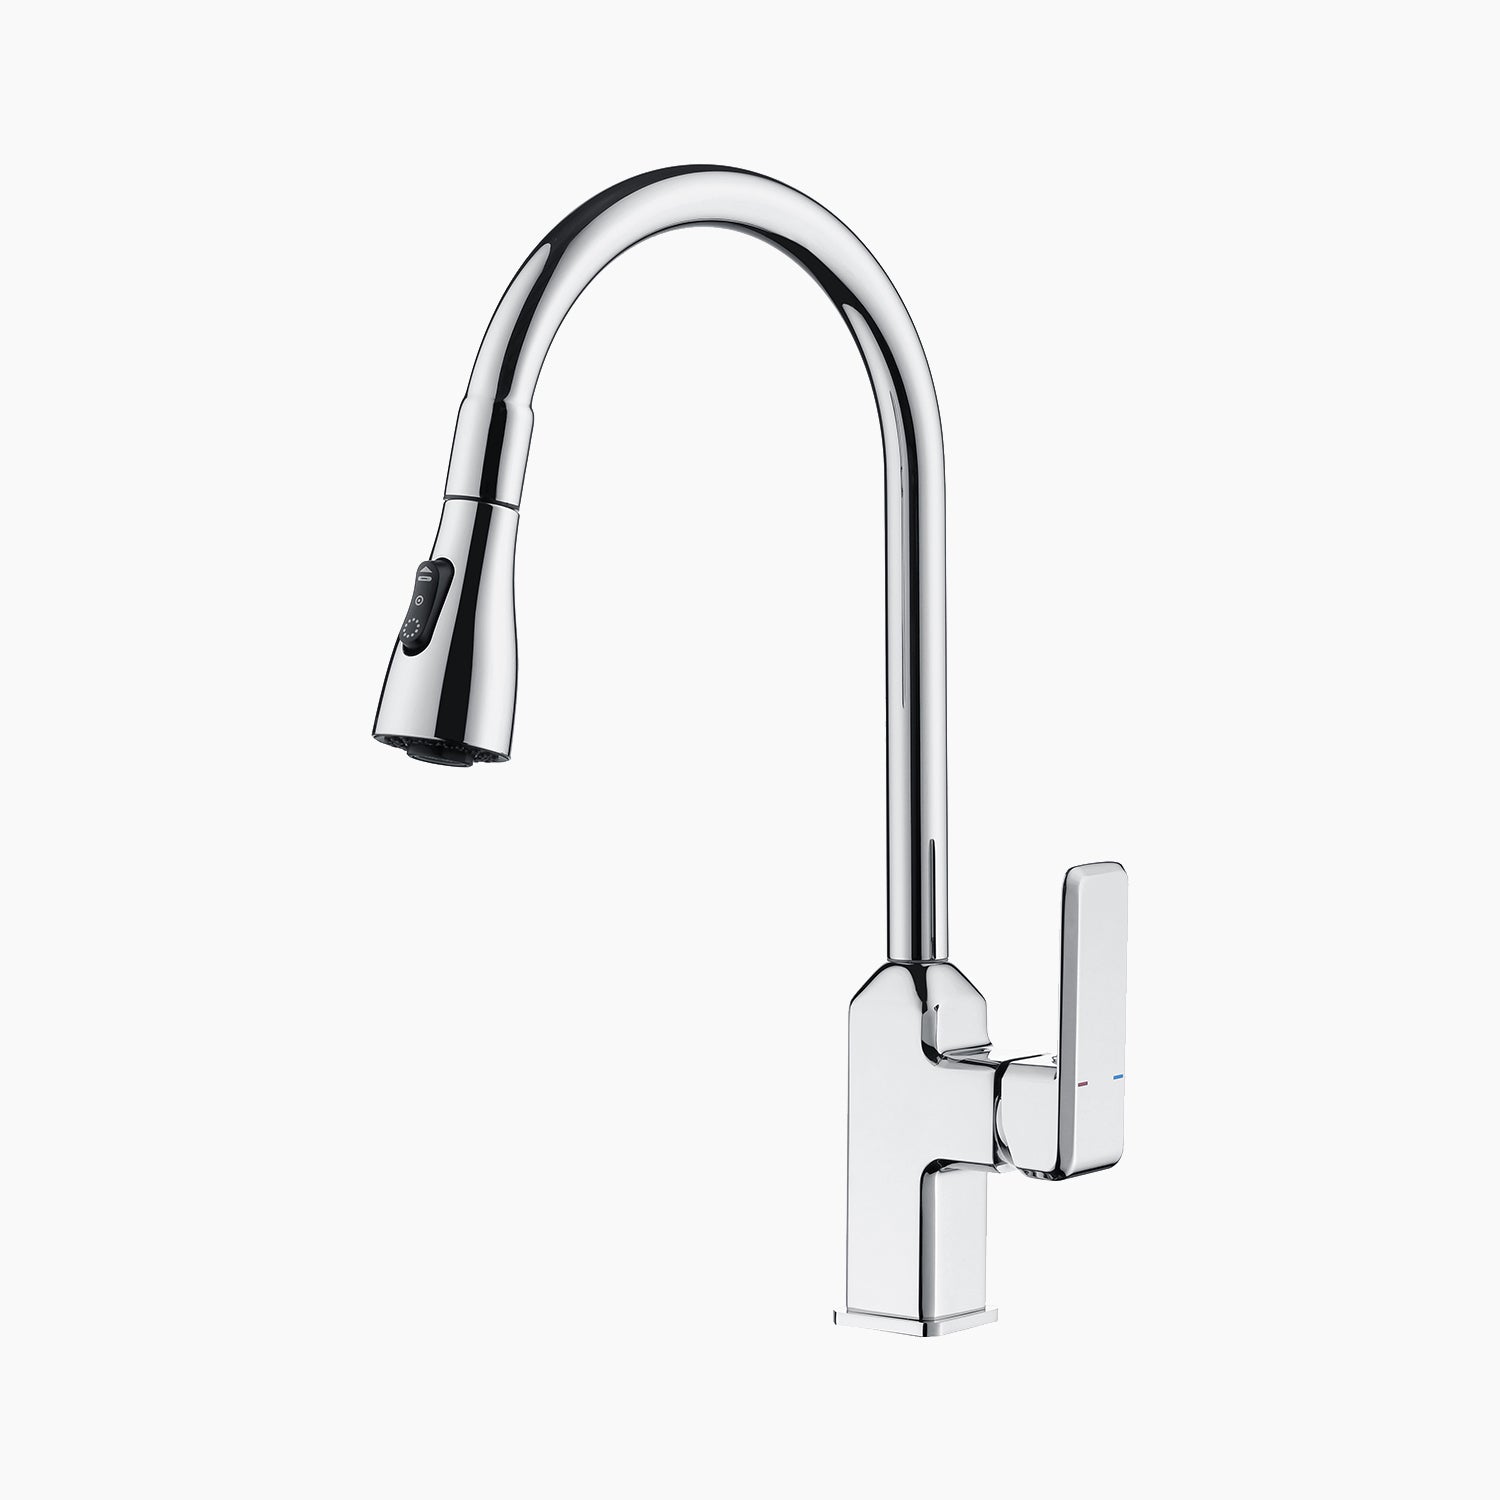 Lefton Copper Kitchen Pull-Down Faucet with 3 Water Outlet Modes-KF2201 -Kitchen Faucets